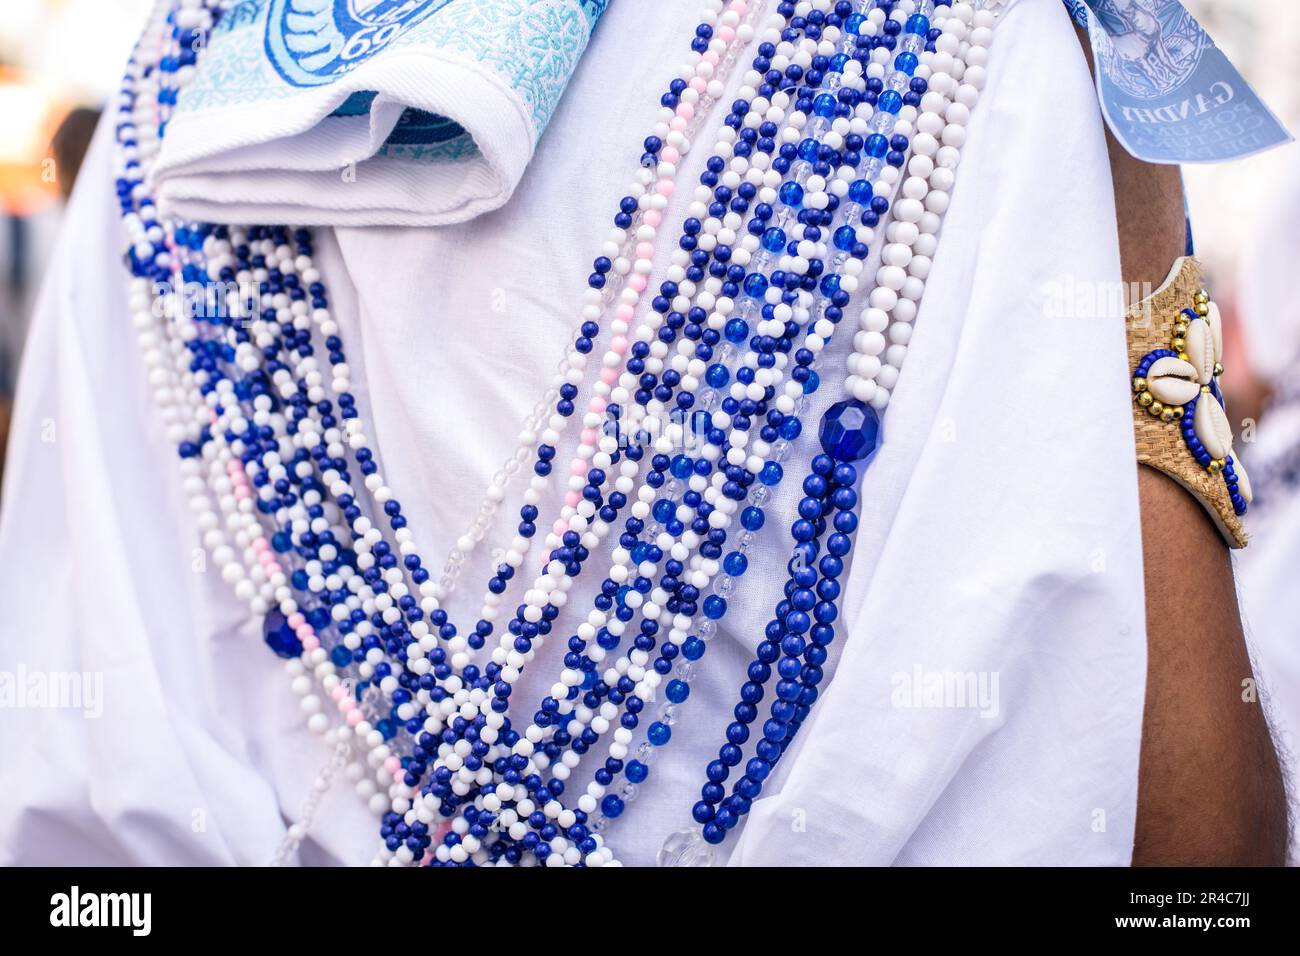 A set of beaded necklaces in shades of blue and white, suspended from a white robe for display Stock Photo